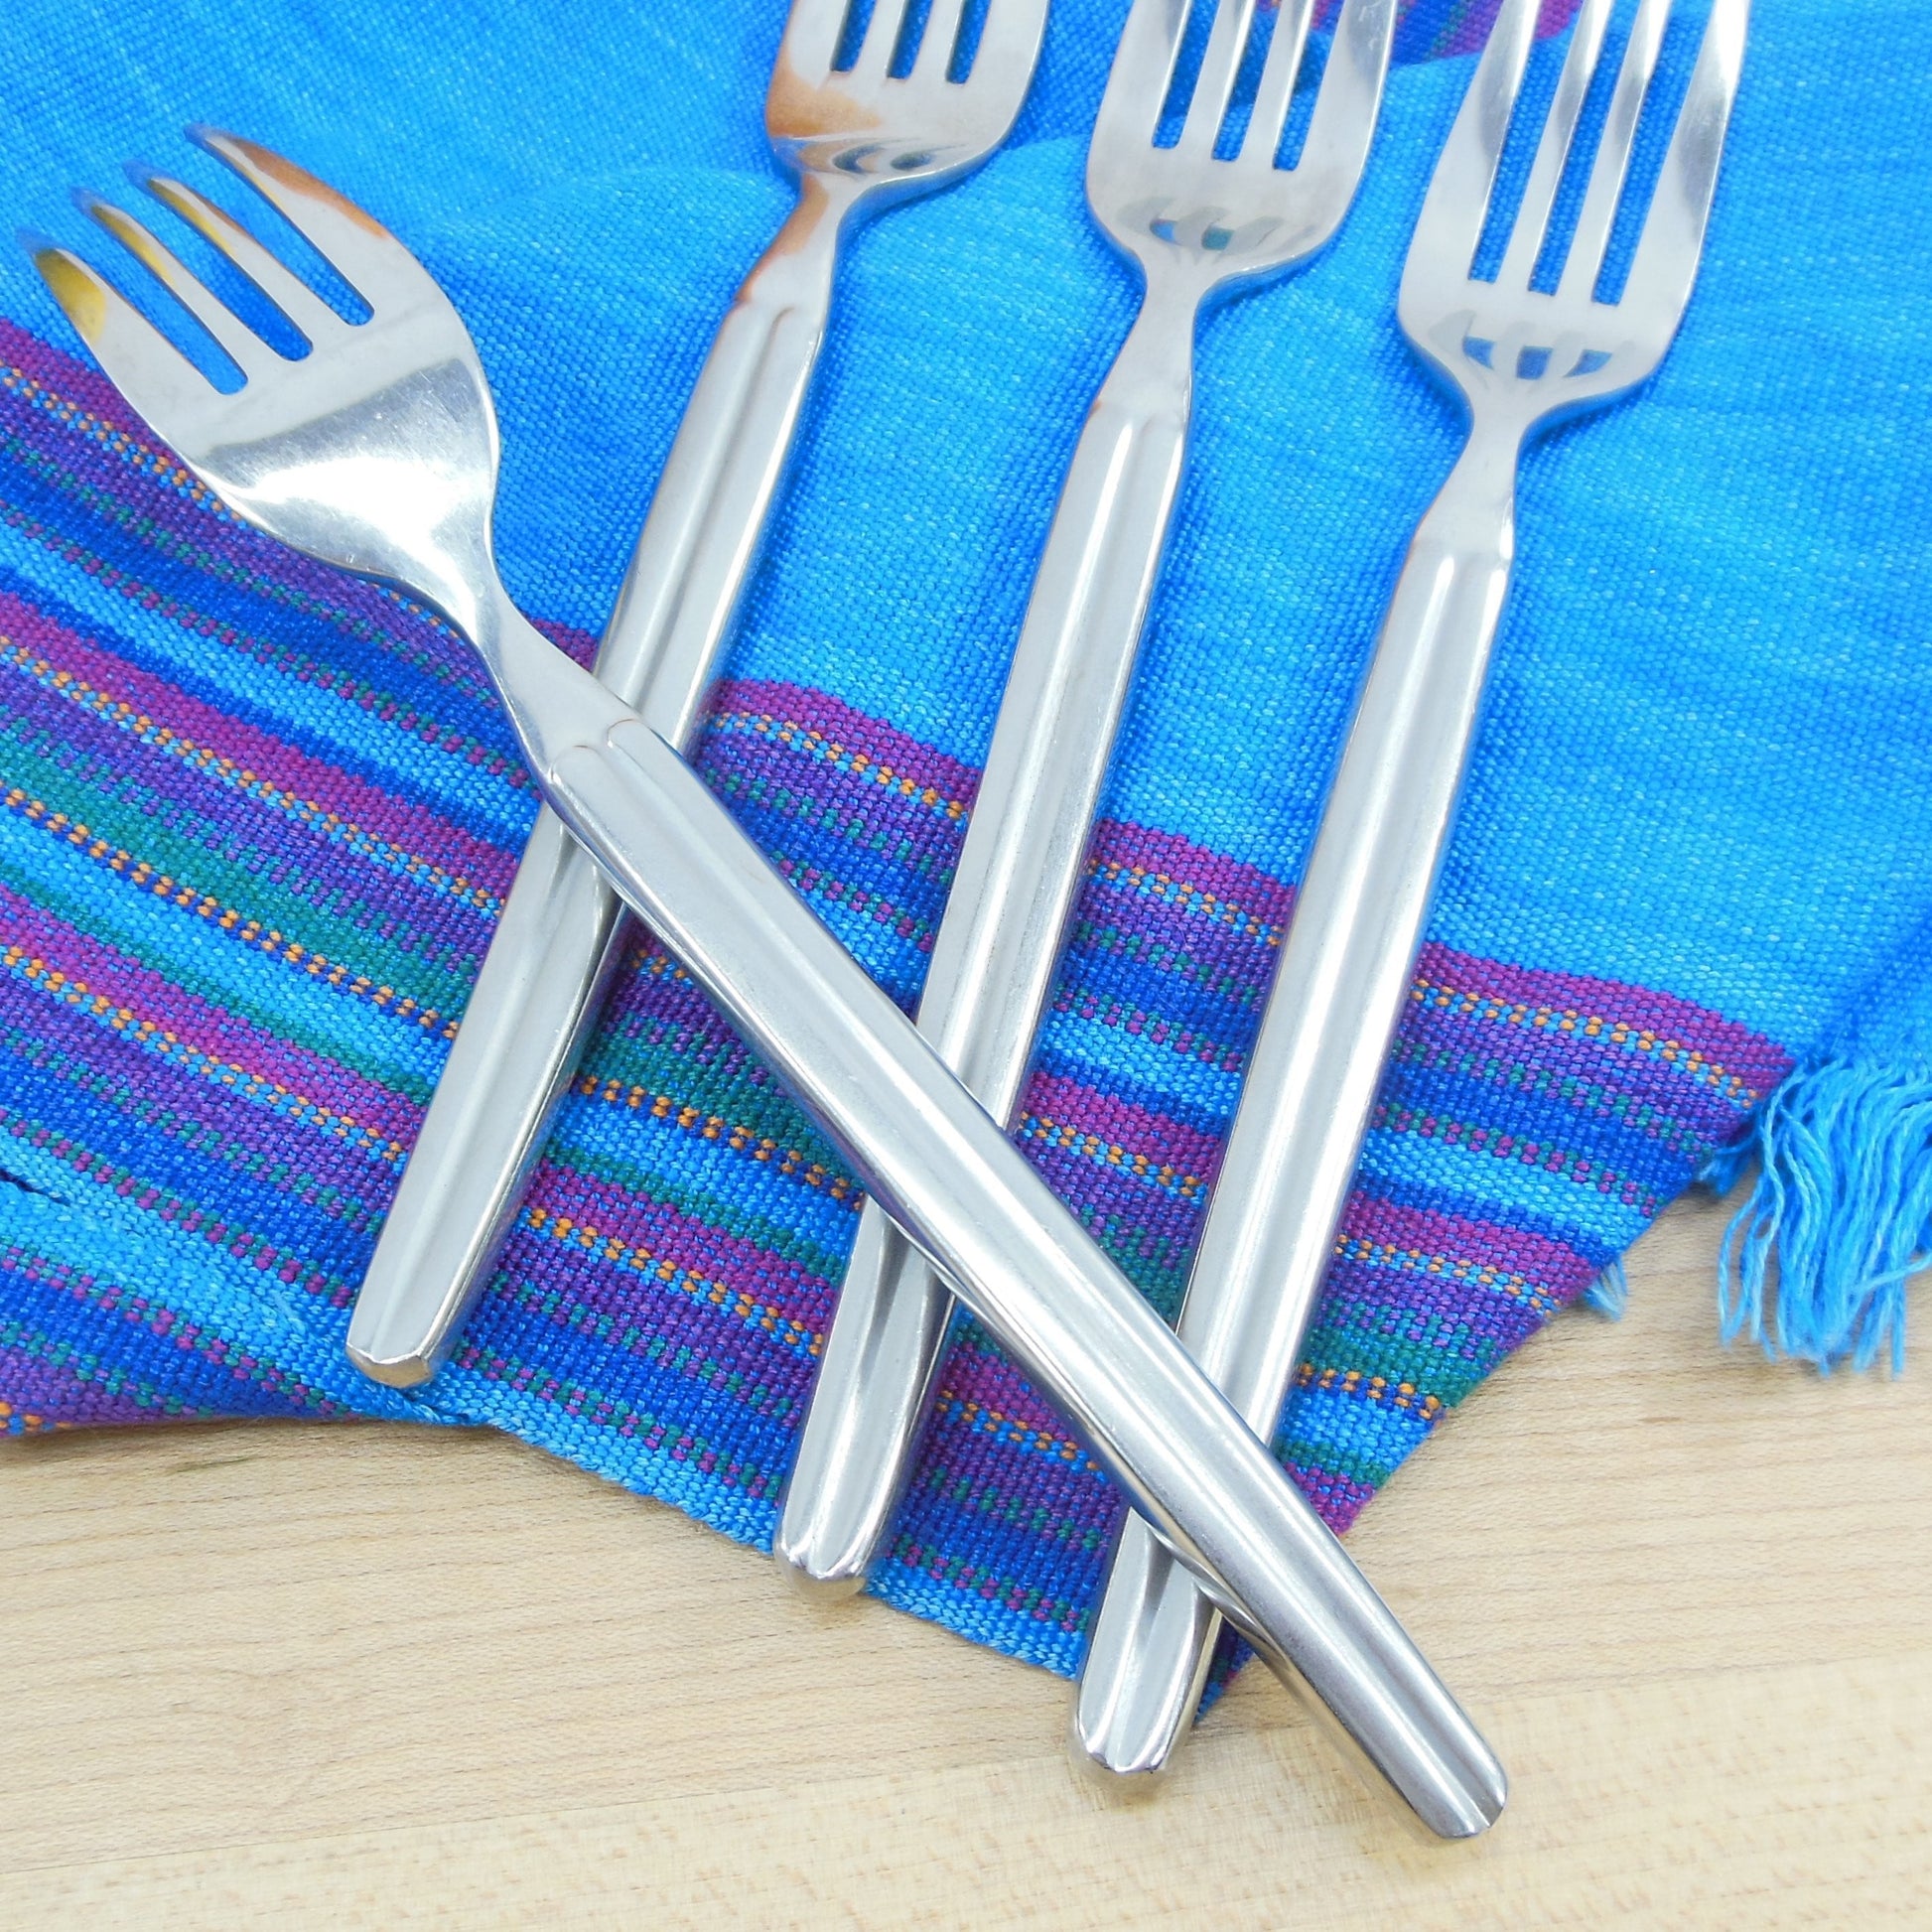 Towle Unknown Pattern 18/10 Stainless 4 Salad Forks - Groove Handle Used China